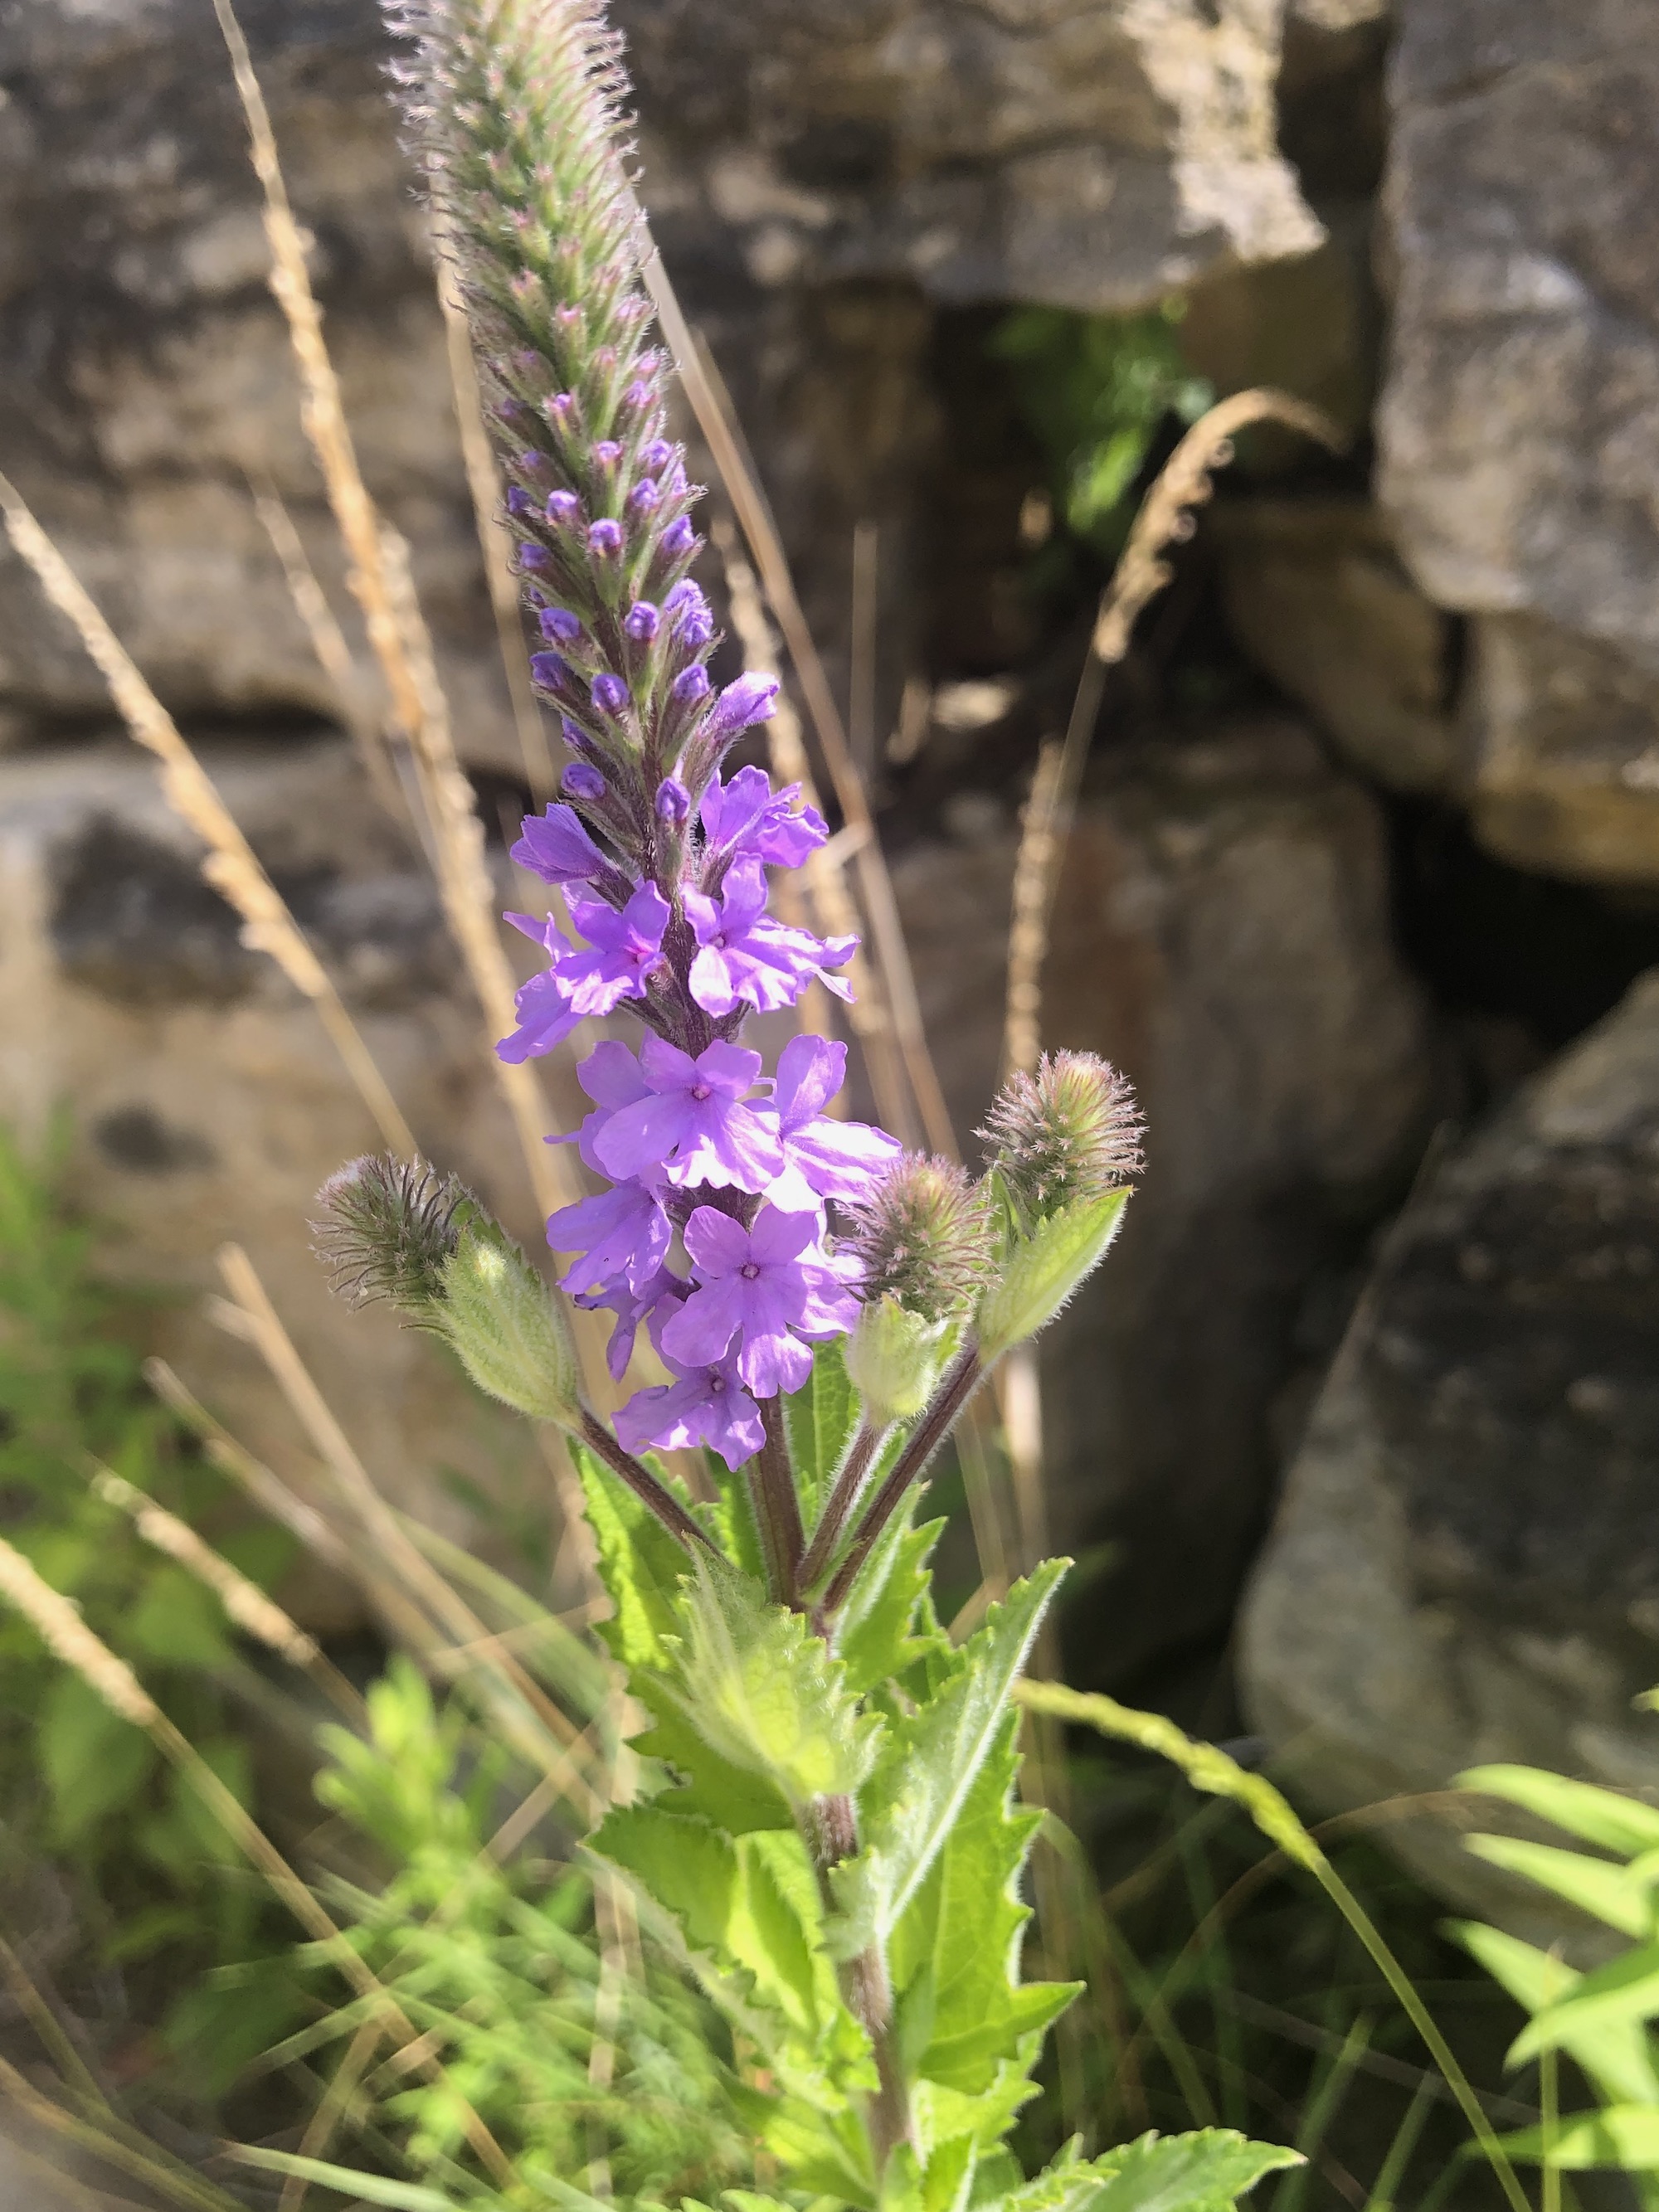 Hoary Vervain next to the UW Arboretum Visitors Center parking lot on June 27, 2020.